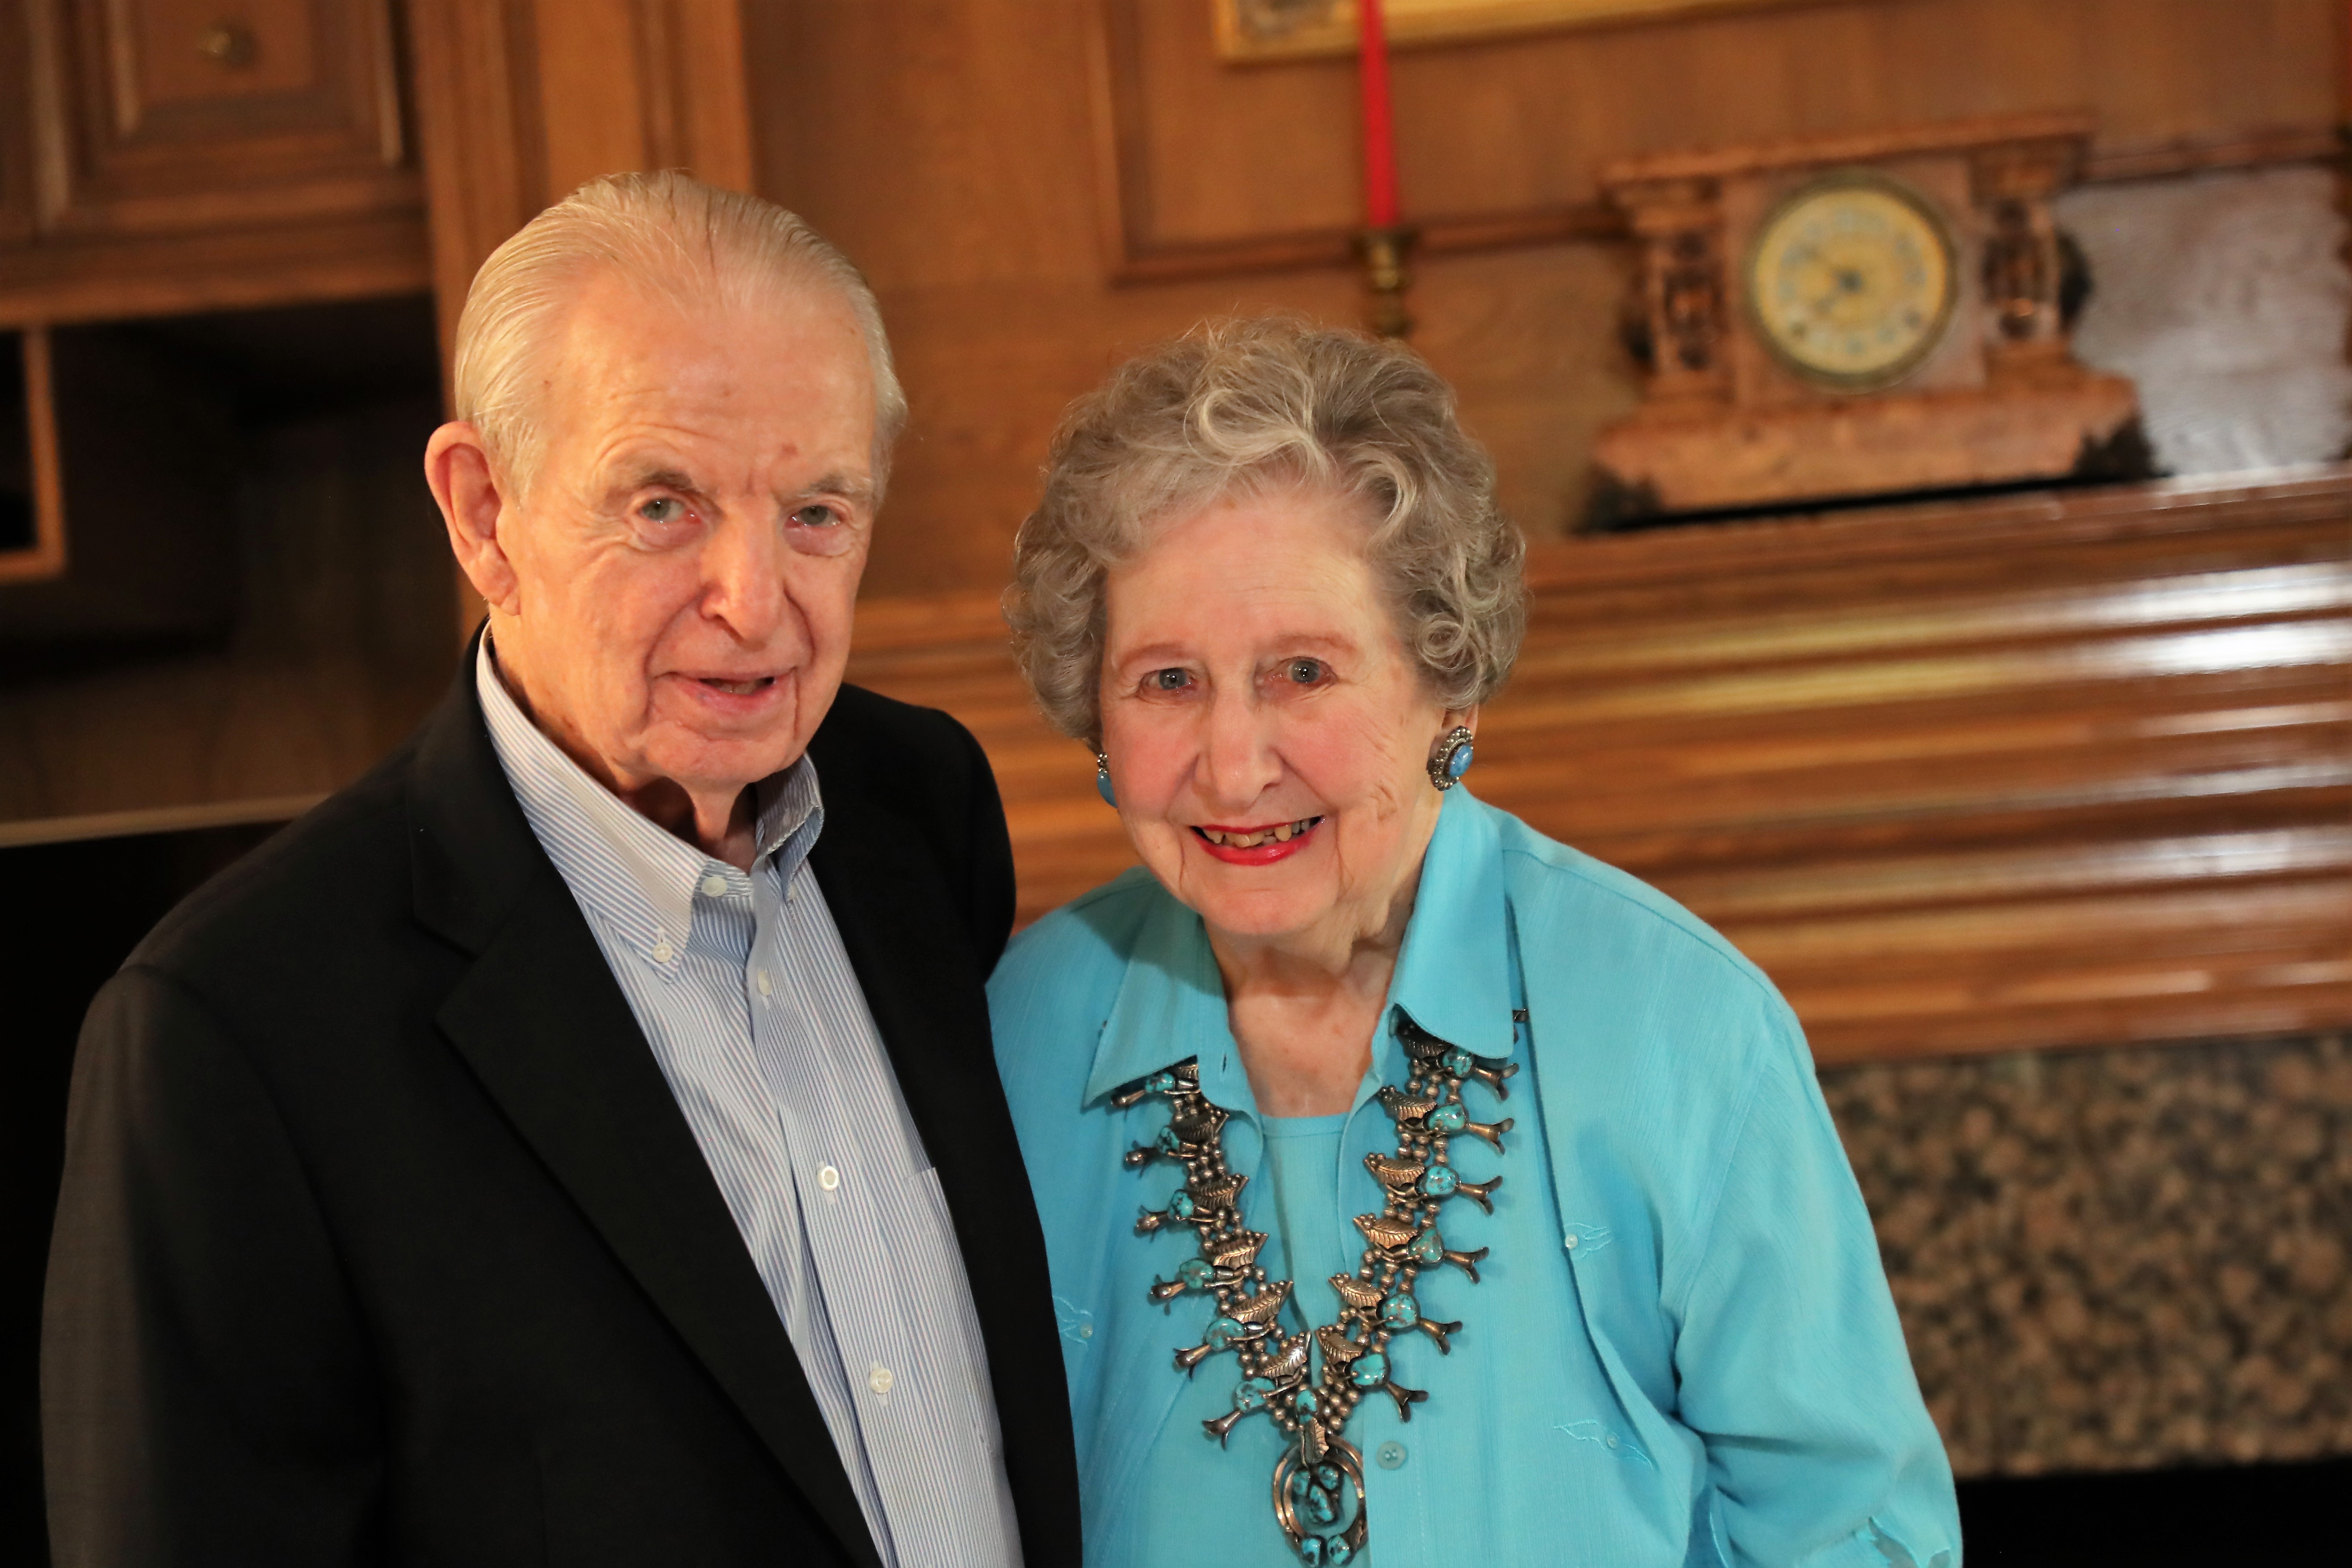 Don and Ruth Buchholz